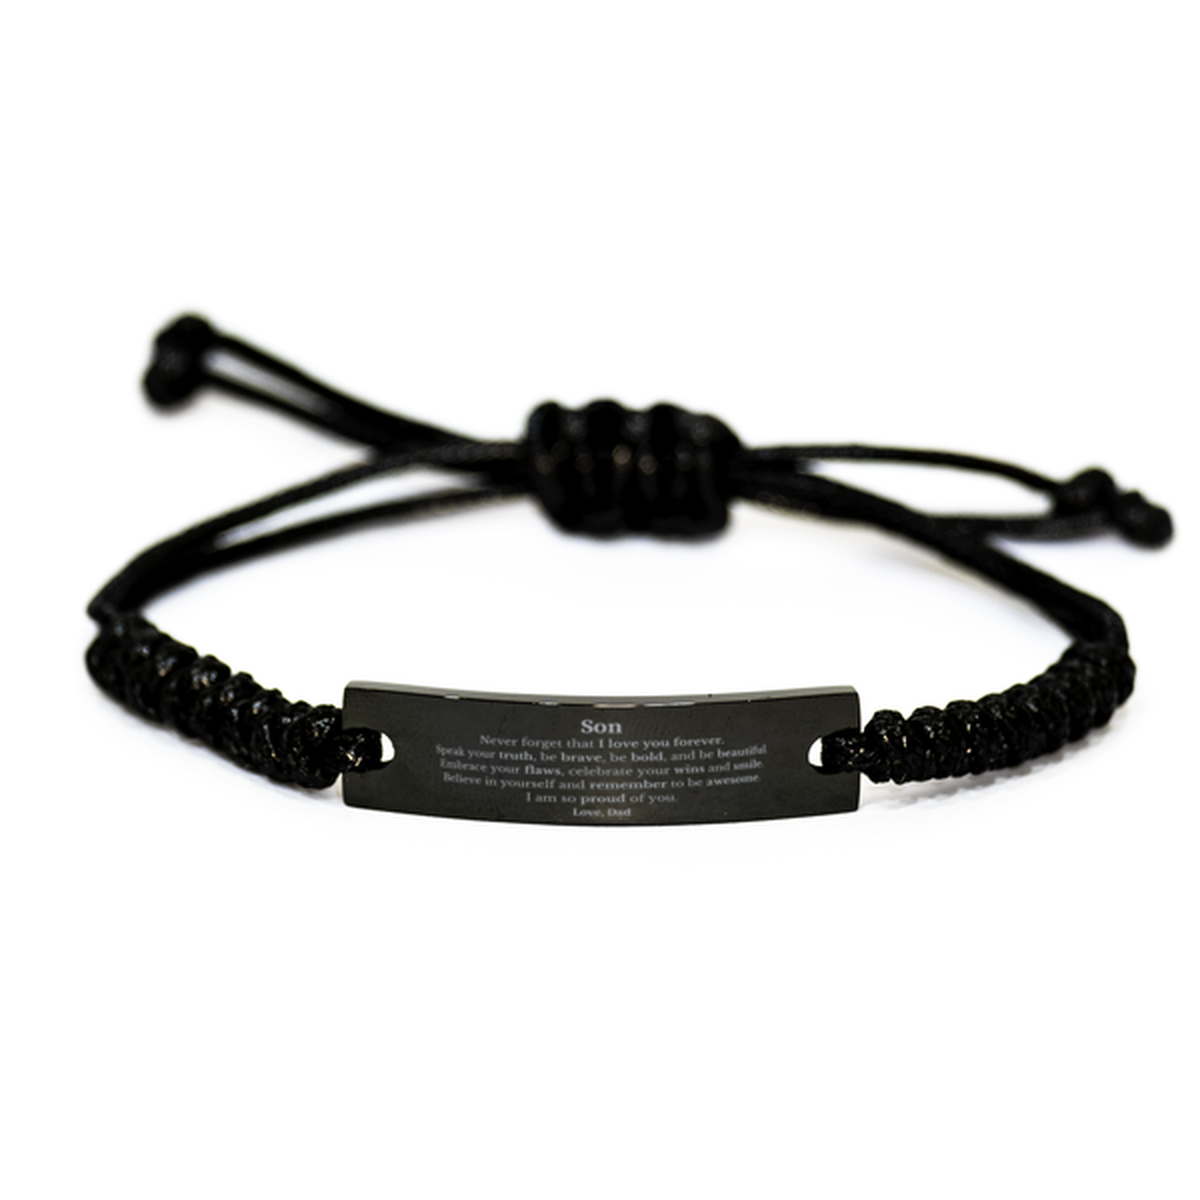 Son Black Rope Bracelet, Never forget that I love you forever, Inspirational Son Birthday Unique Gifts From Dad